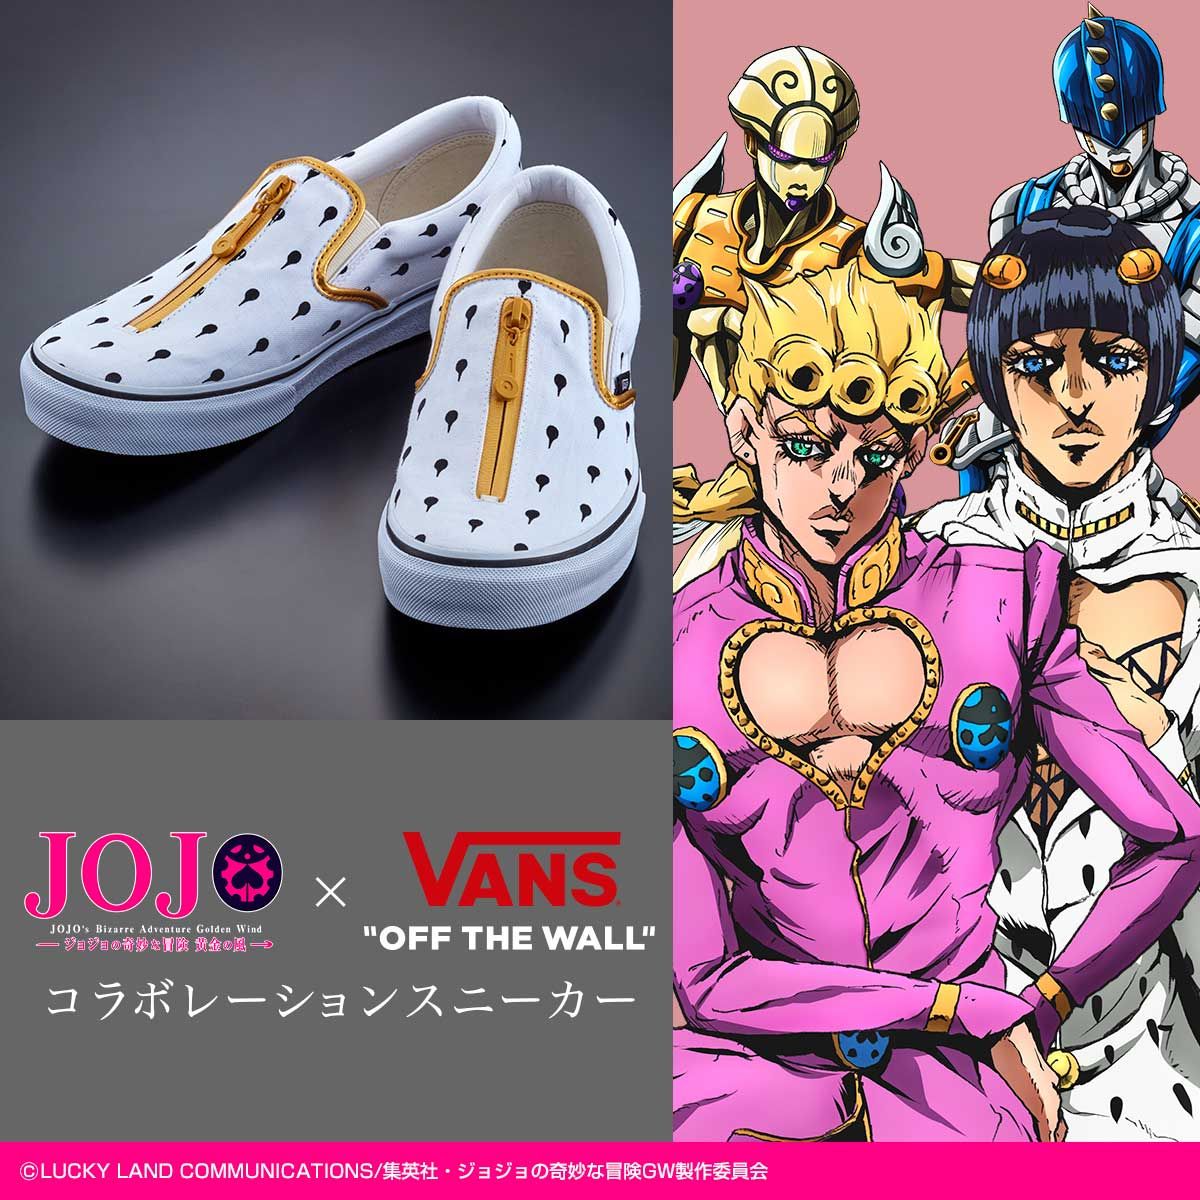 Autocomplacencia Astrolabio Personas con discapacidad auditiva OTAQUEST on Twitter: "JoJo's Bizarre Adventure x VANS collaboration - based  on Part 5 of the series. Designs featuring the essence of Giorno Giovanna  and Bruno Bucciarati available for pre-order until June